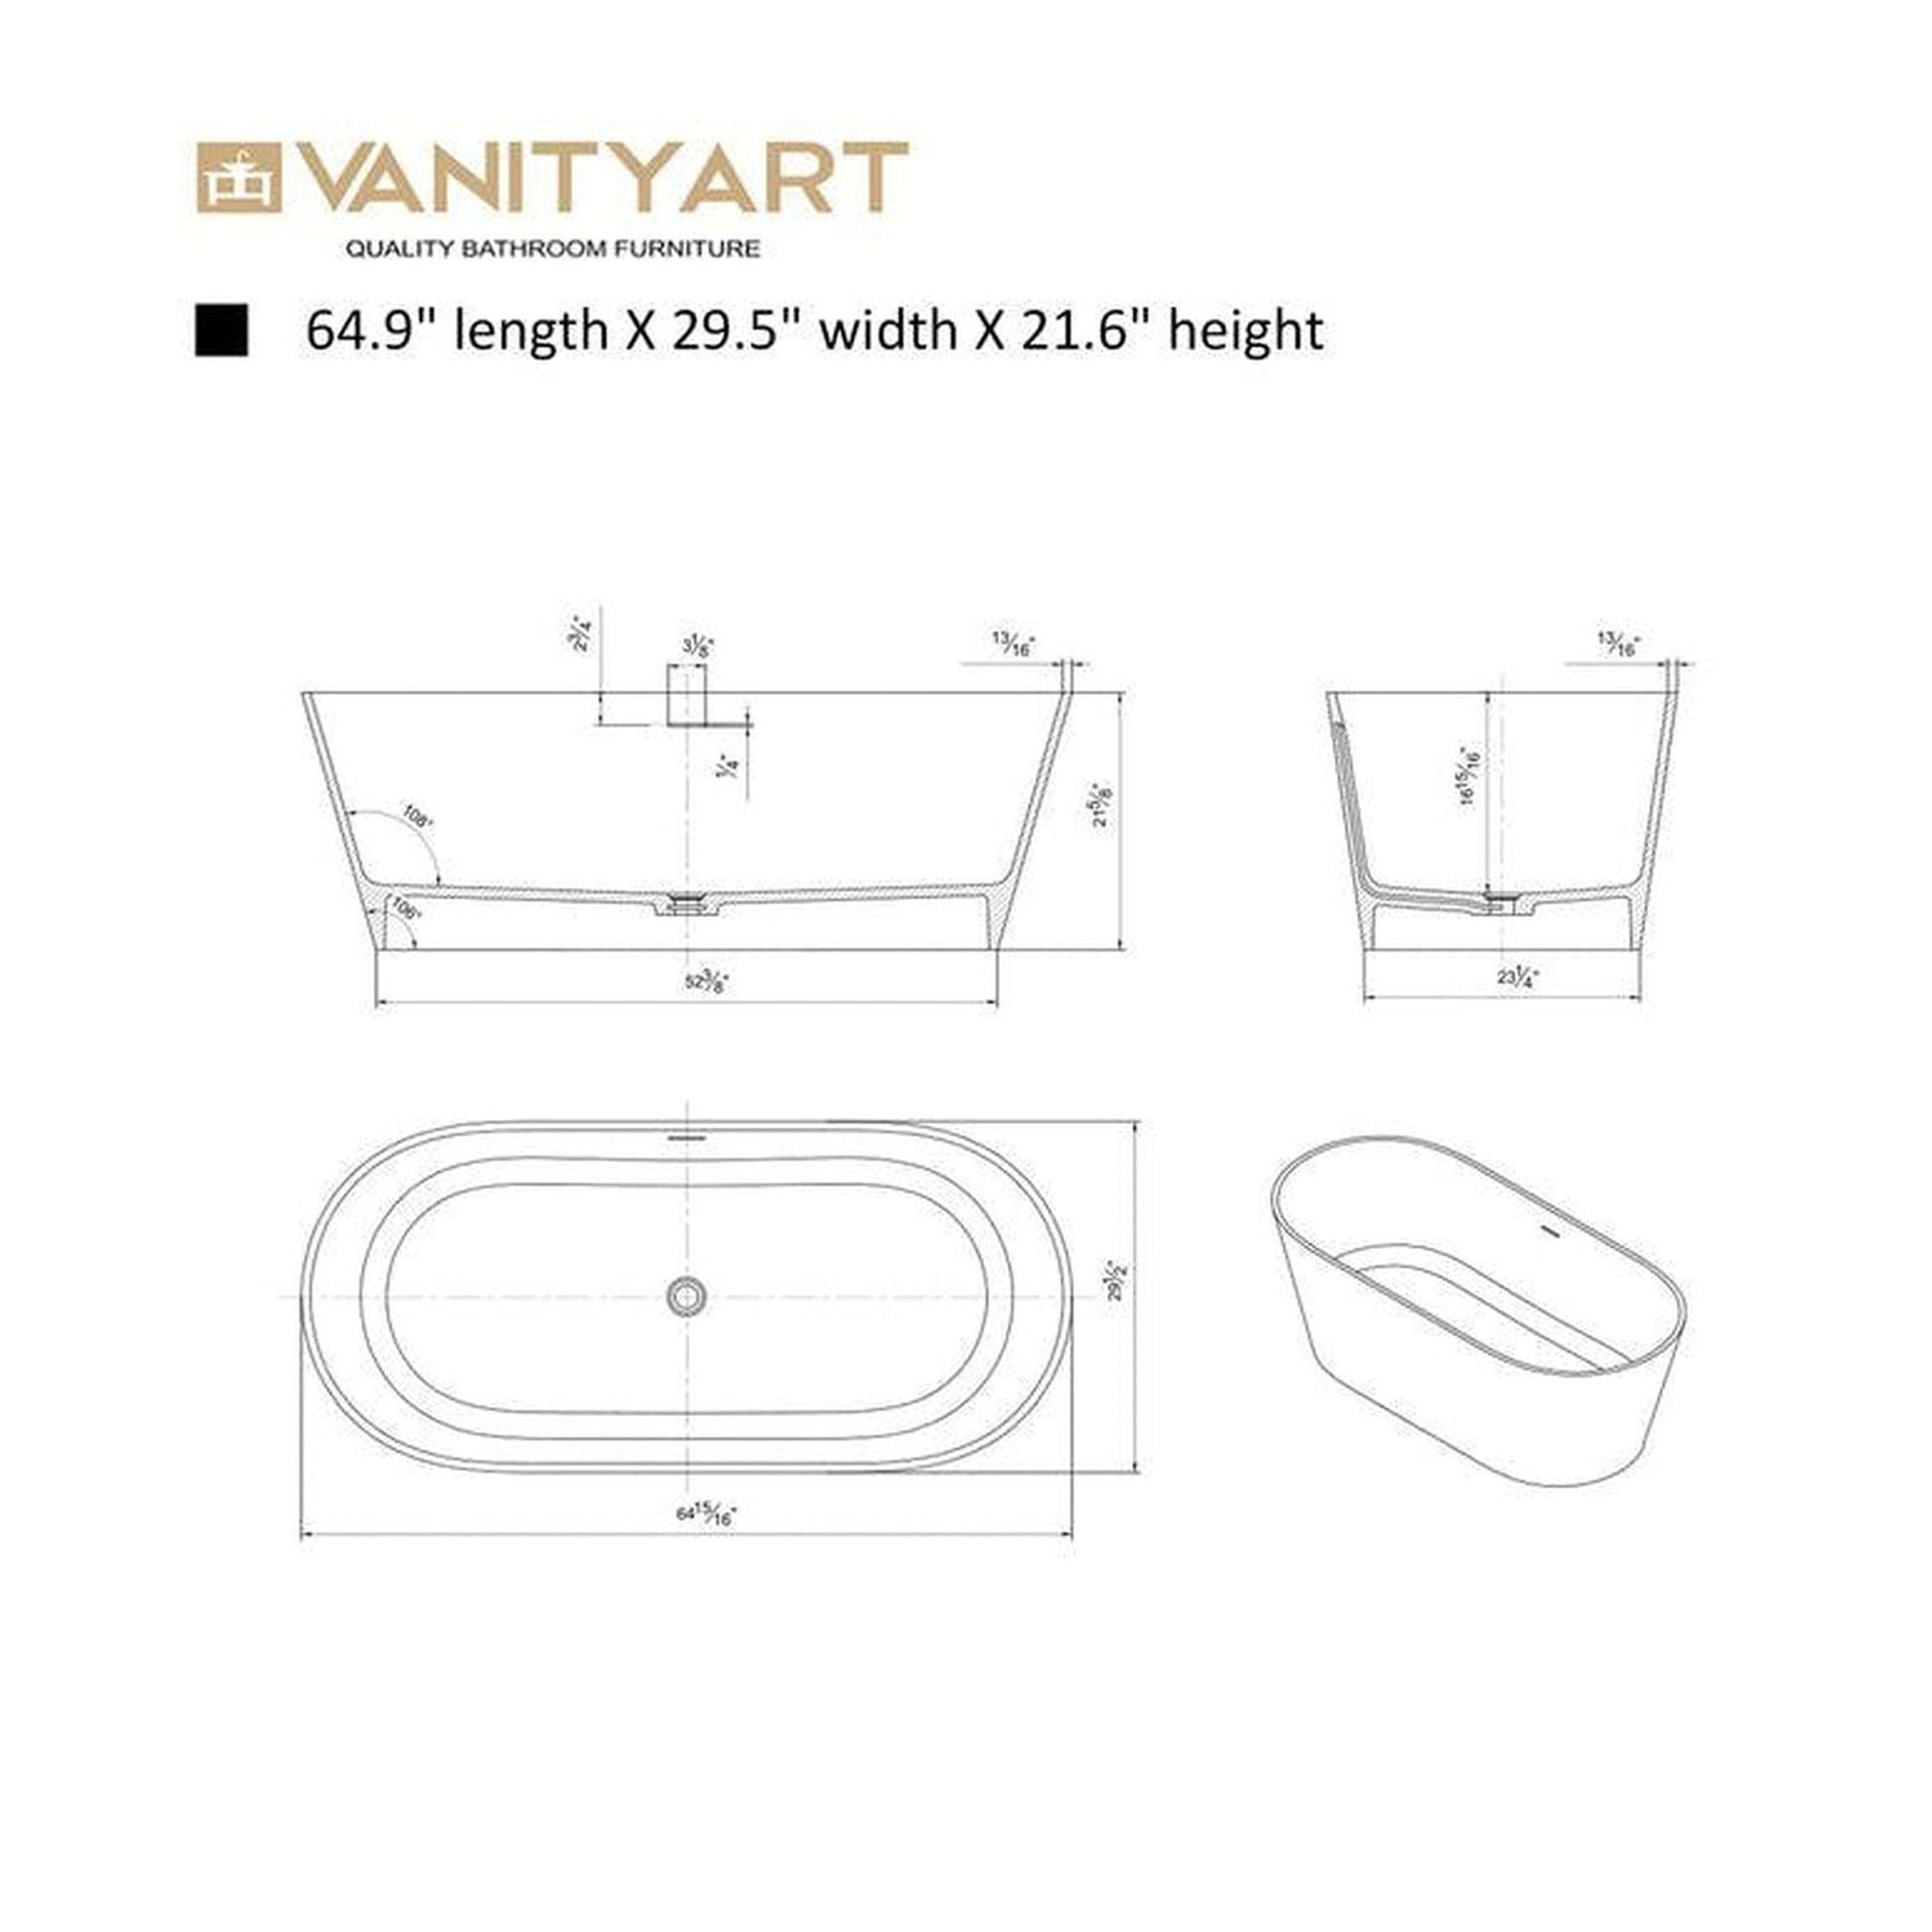 Vanity Art 65" Glossy White Solid Surface Resin Stone Freestanding Bathtub With Overflow and Pop-up Drain